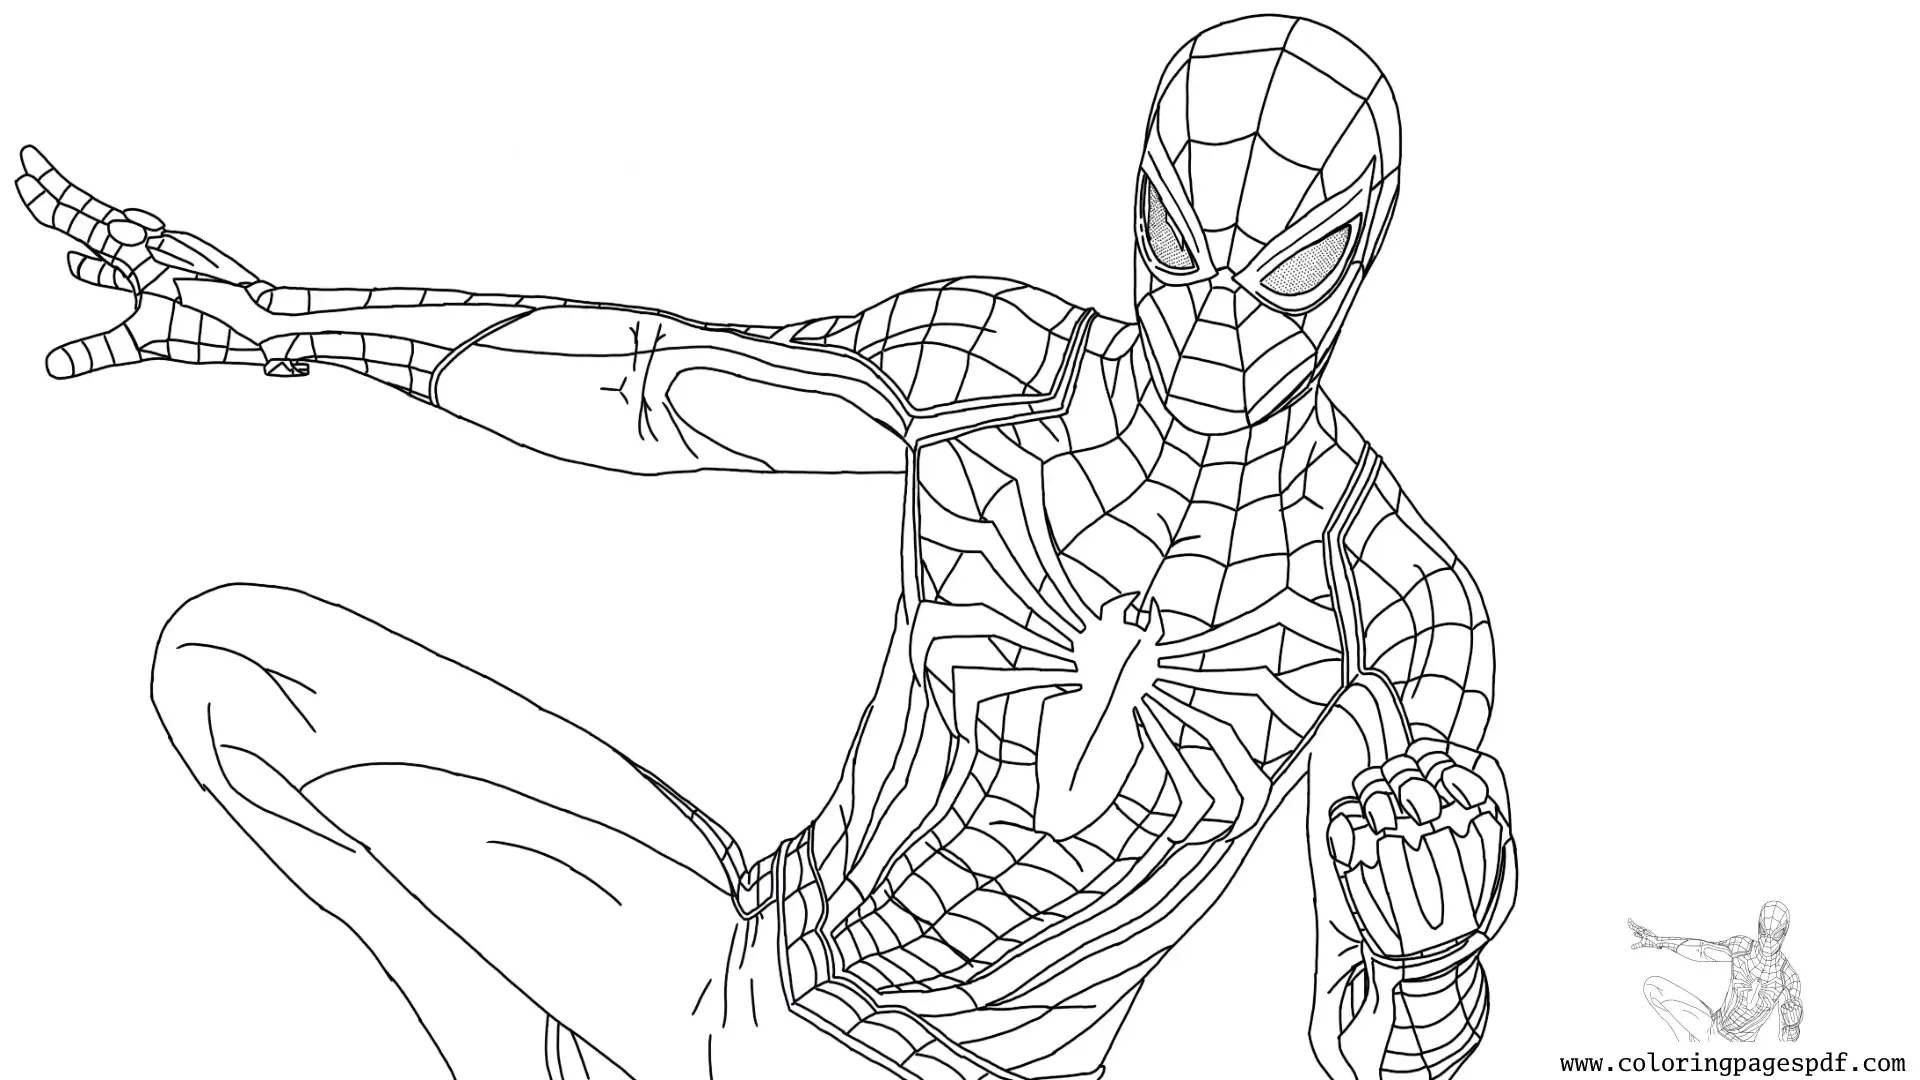 Coloring Page Of Spiderman In A Cool Stance